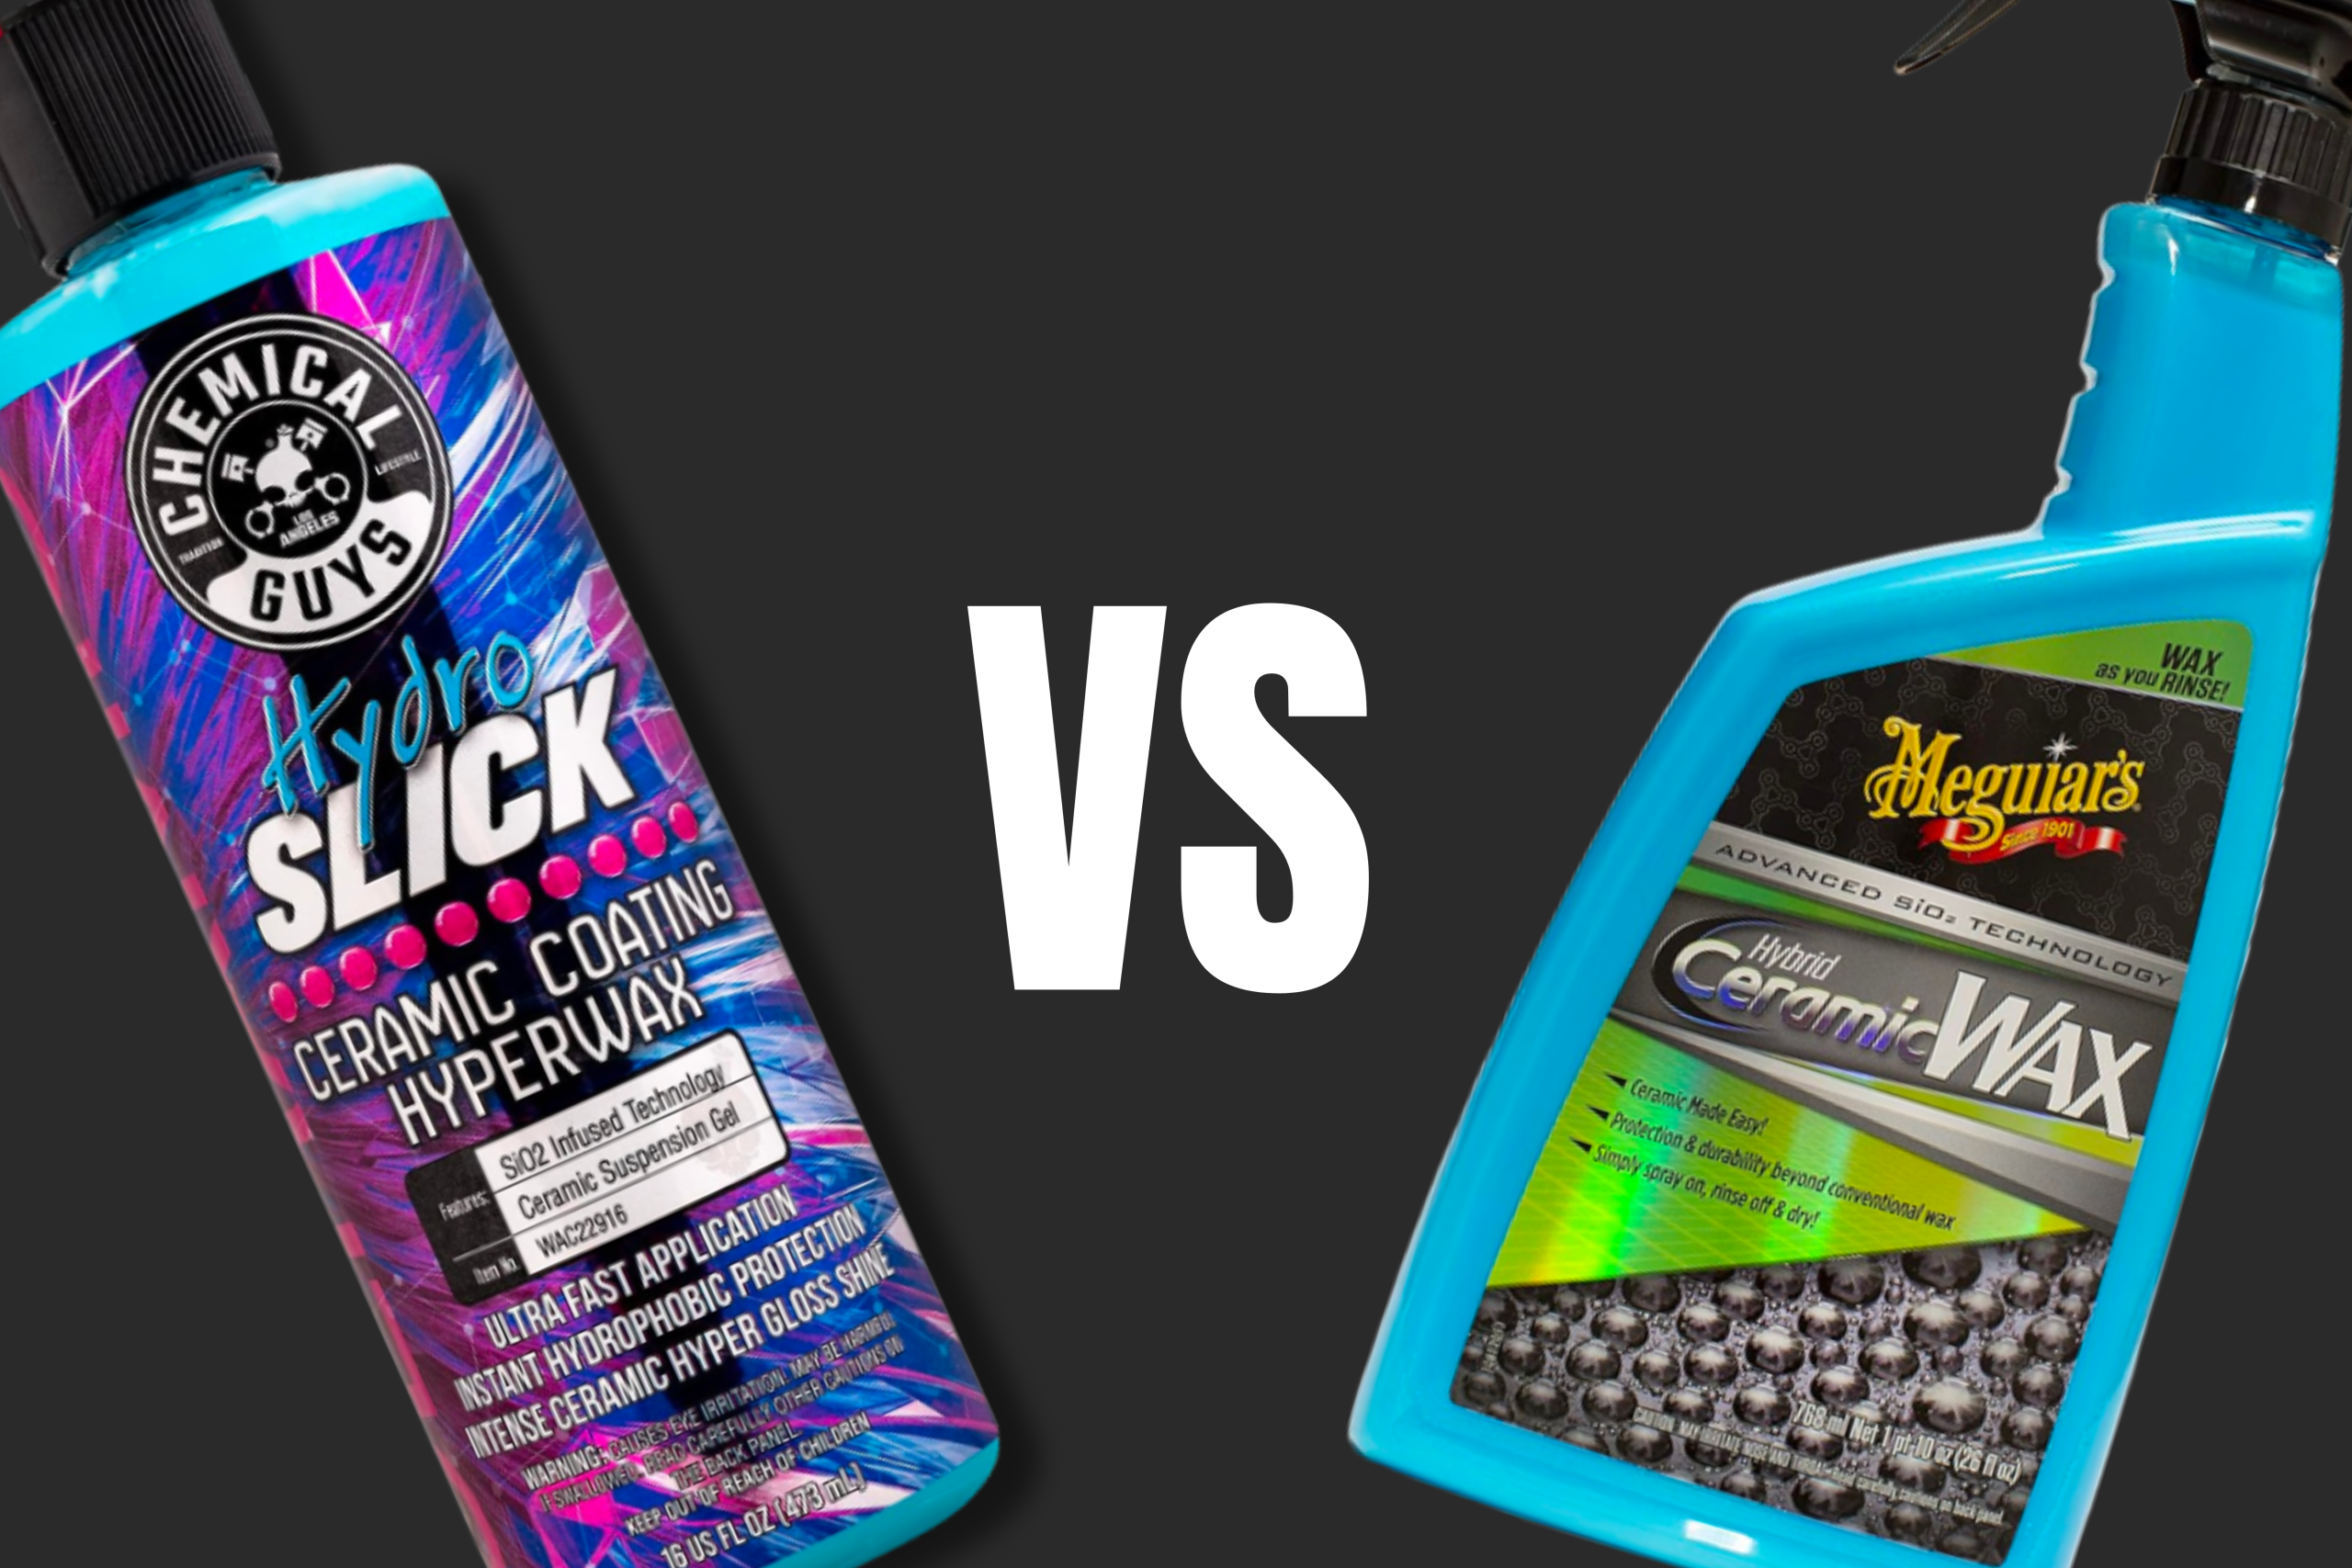 Chemical Guys Ceramic vs. Meguiar’s Ceramic: Which is Better?